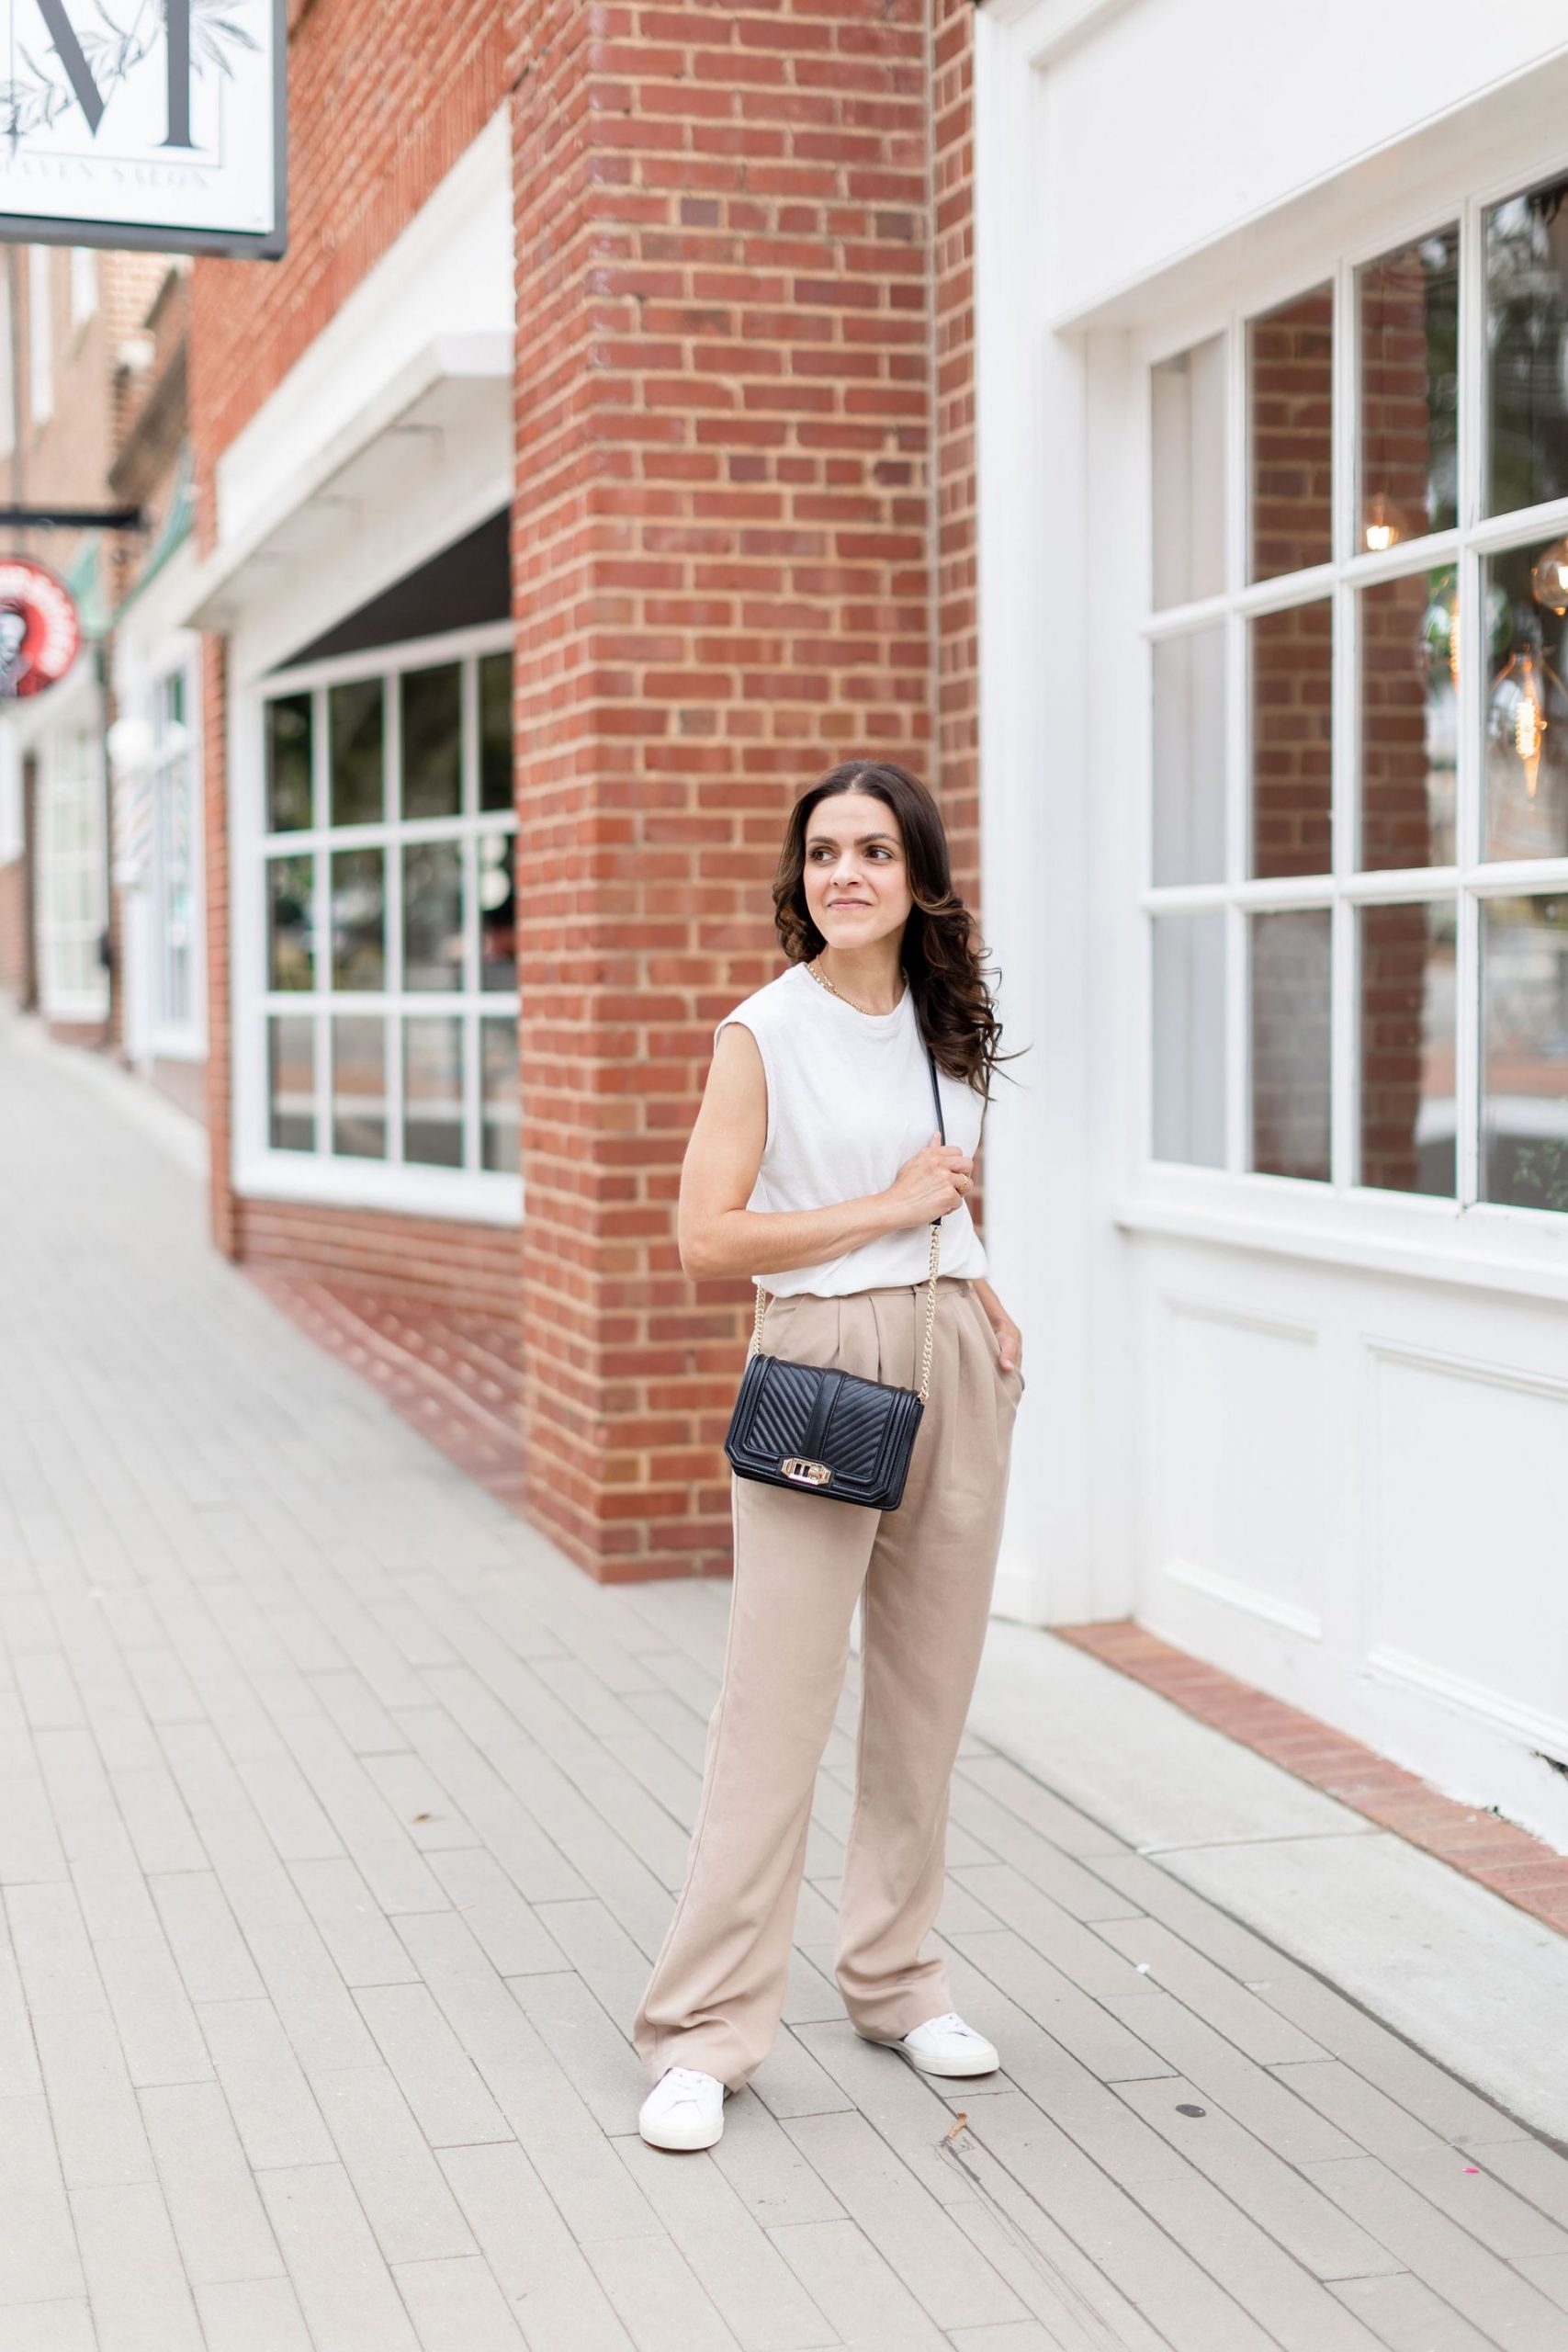 4 Ways to Style High Waisted Tan Trousers